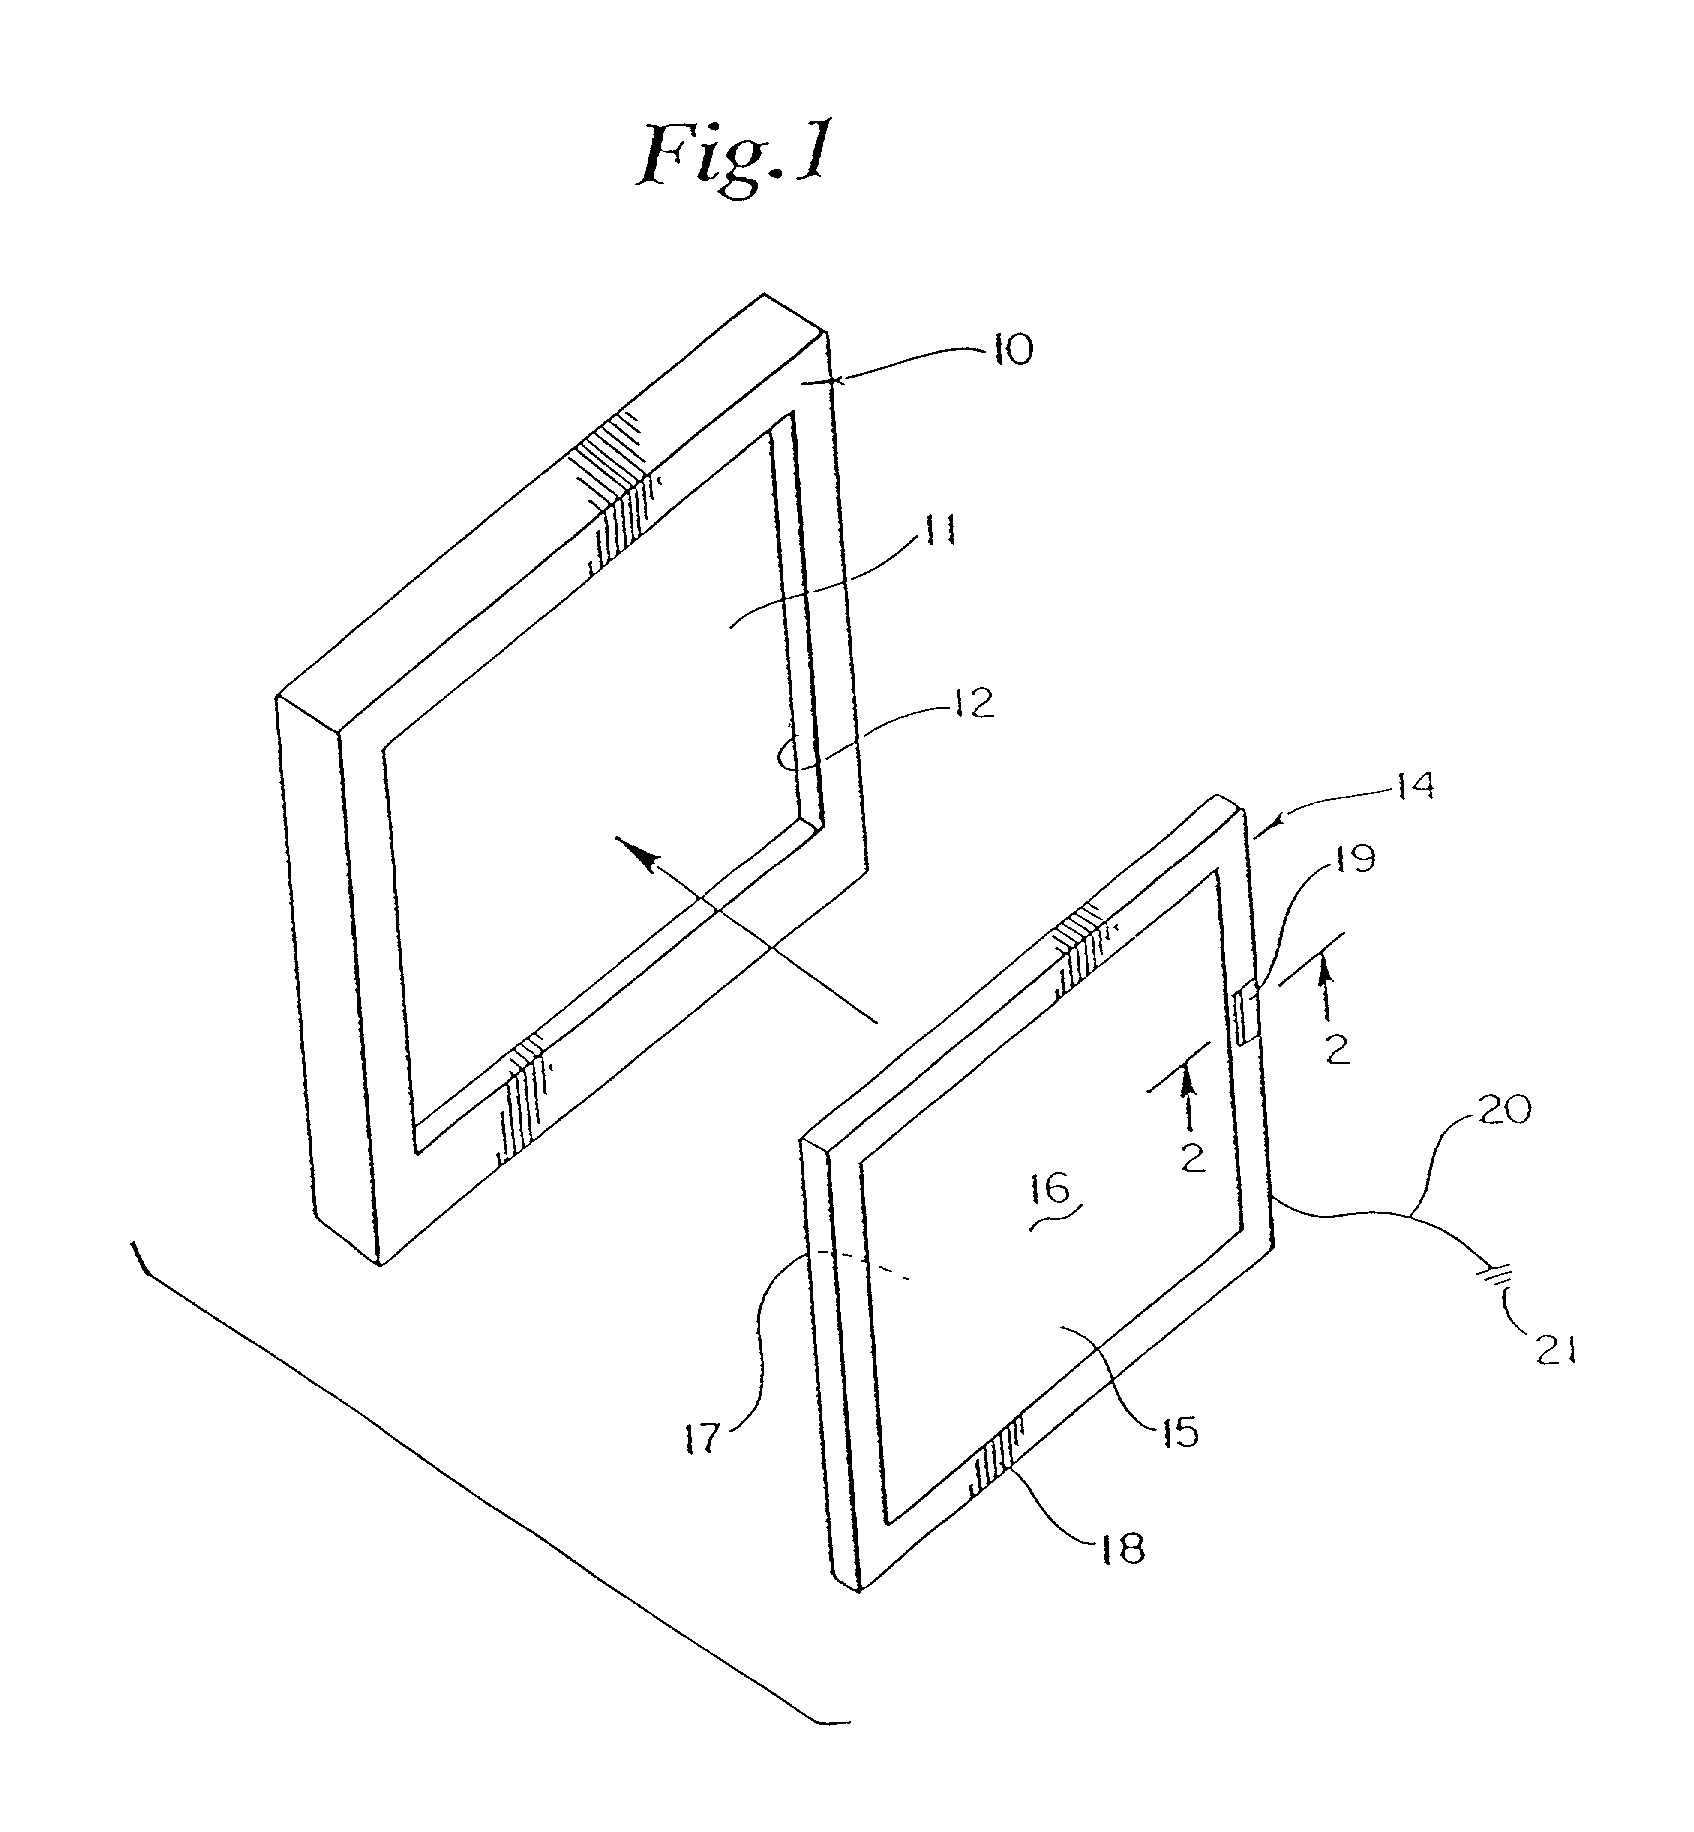 Display panel filter for connection to a display panel